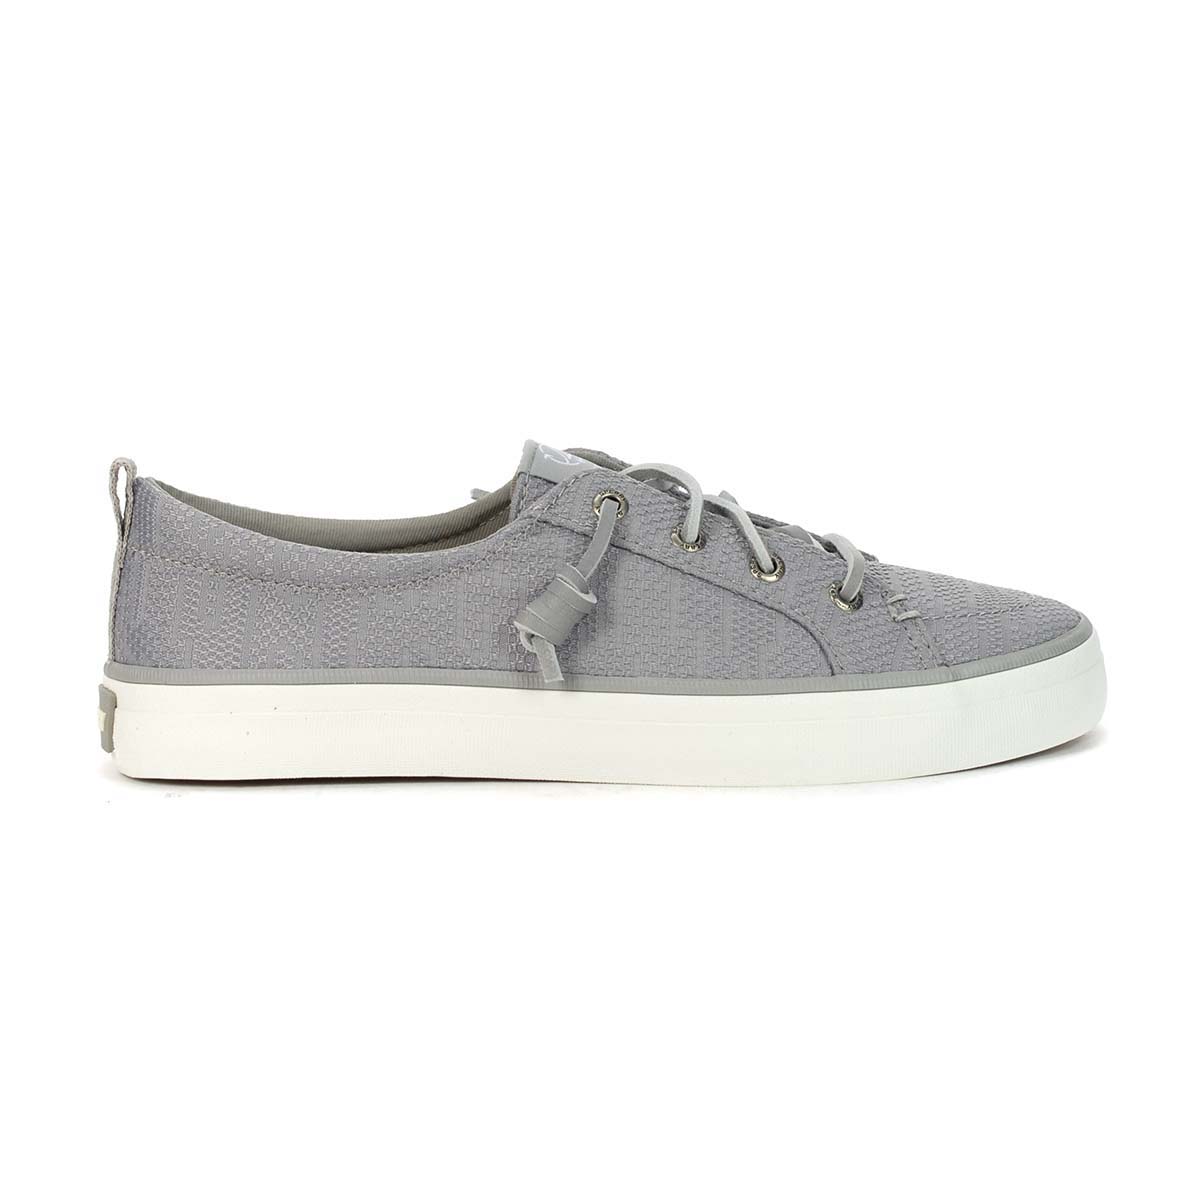 Sperry Women's Crest Vibe Grey Jacquard Sneakers STS88905